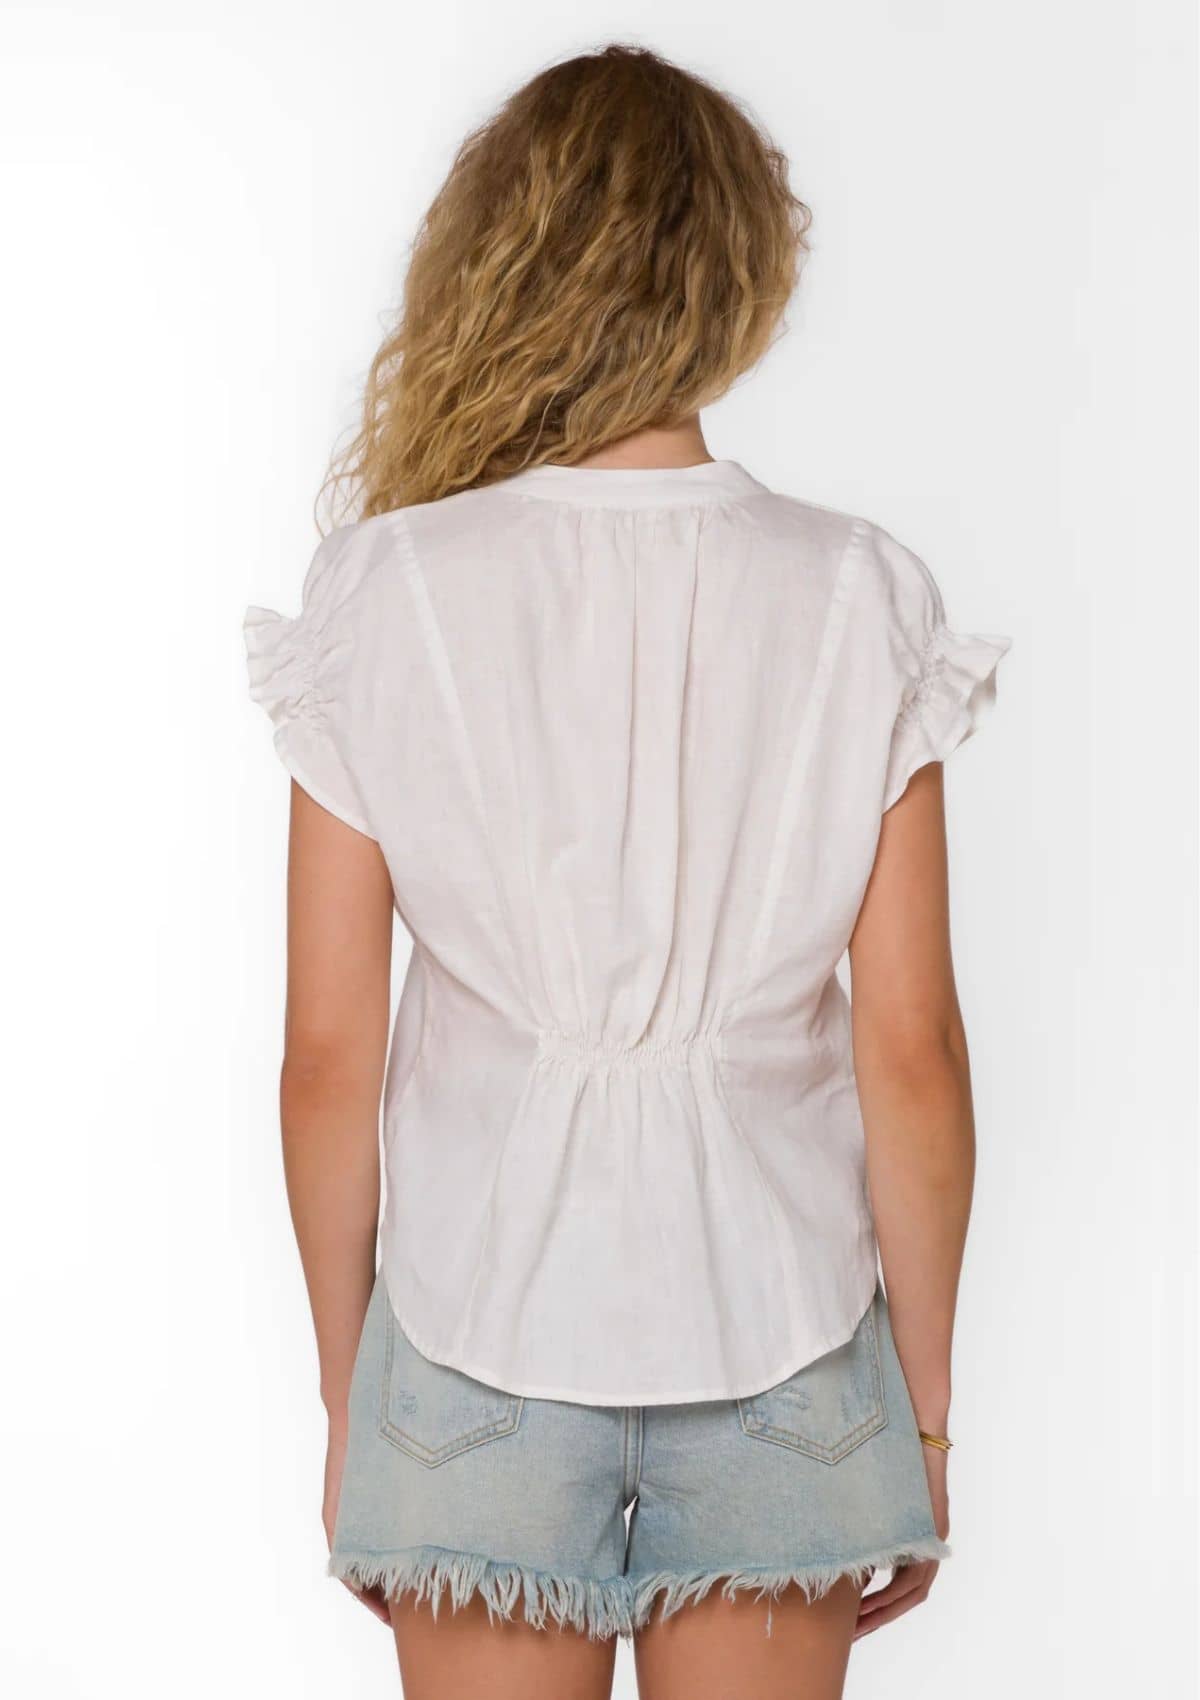 Ruffle short sleeves and cinched back.